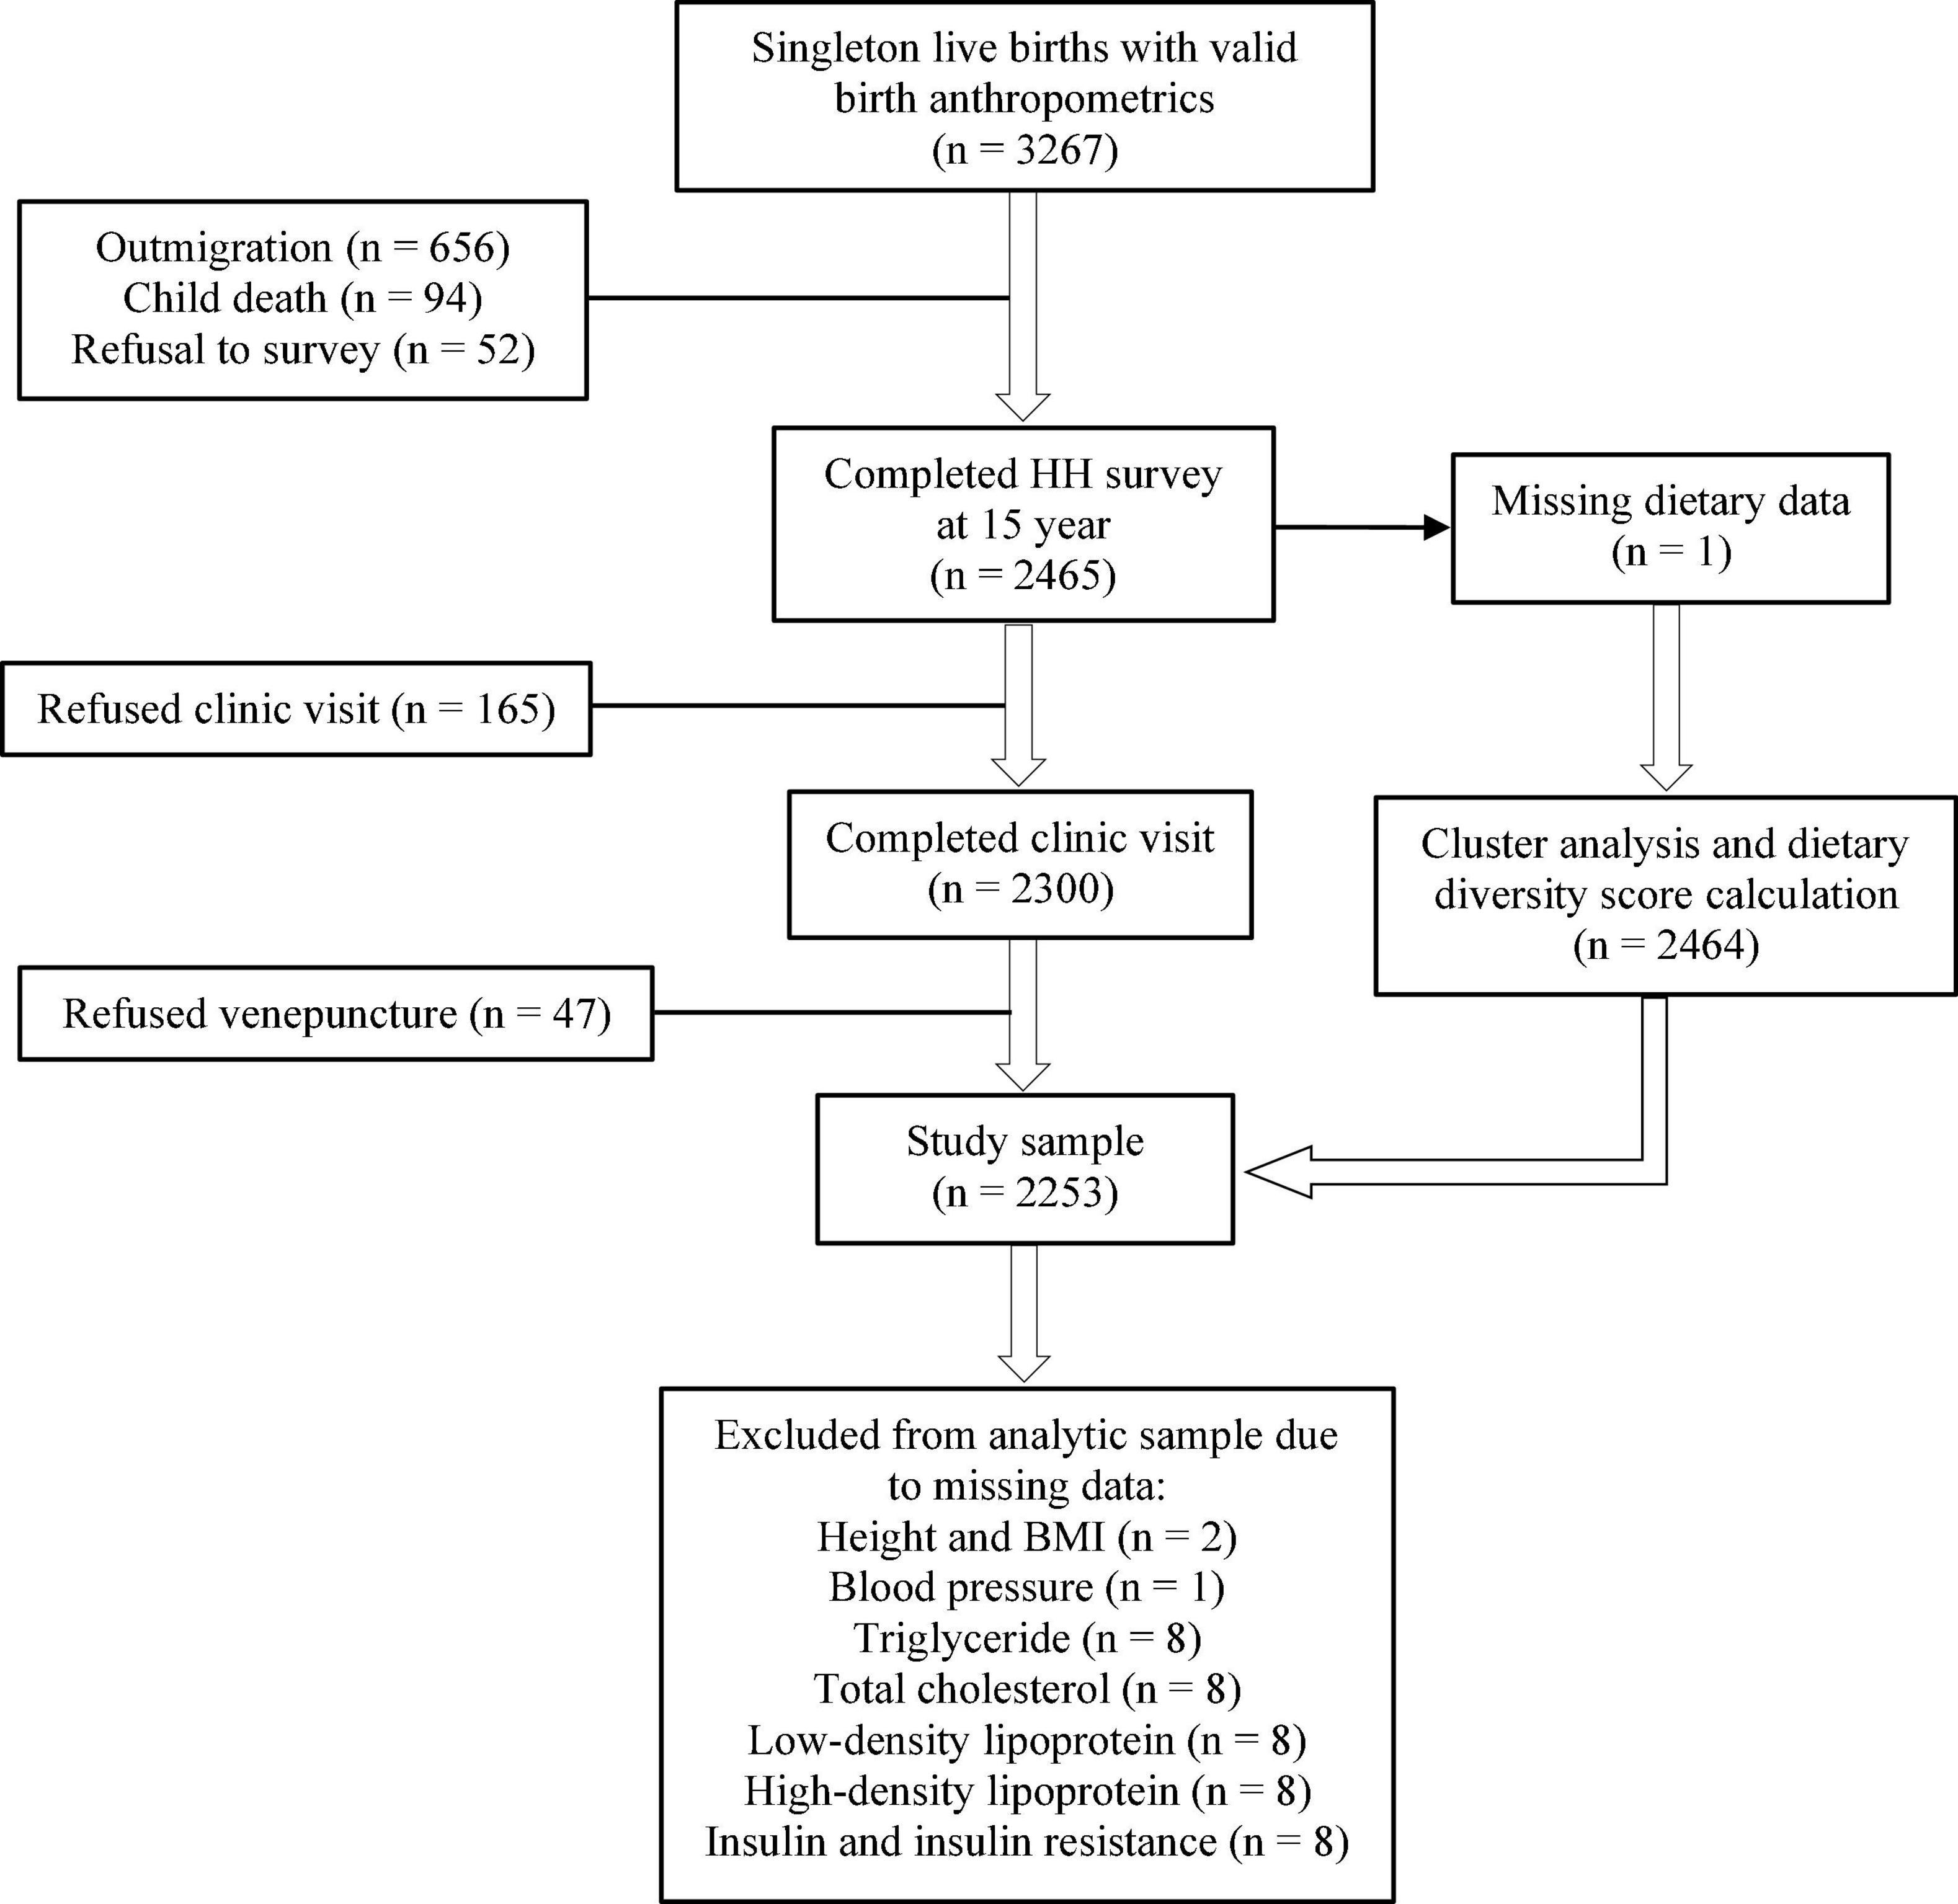 Dietary patterns and indicators of cardiometabolic risk among rural adolescents: A cross-sectional study at 15-year follow-up of the MINIMat cohort